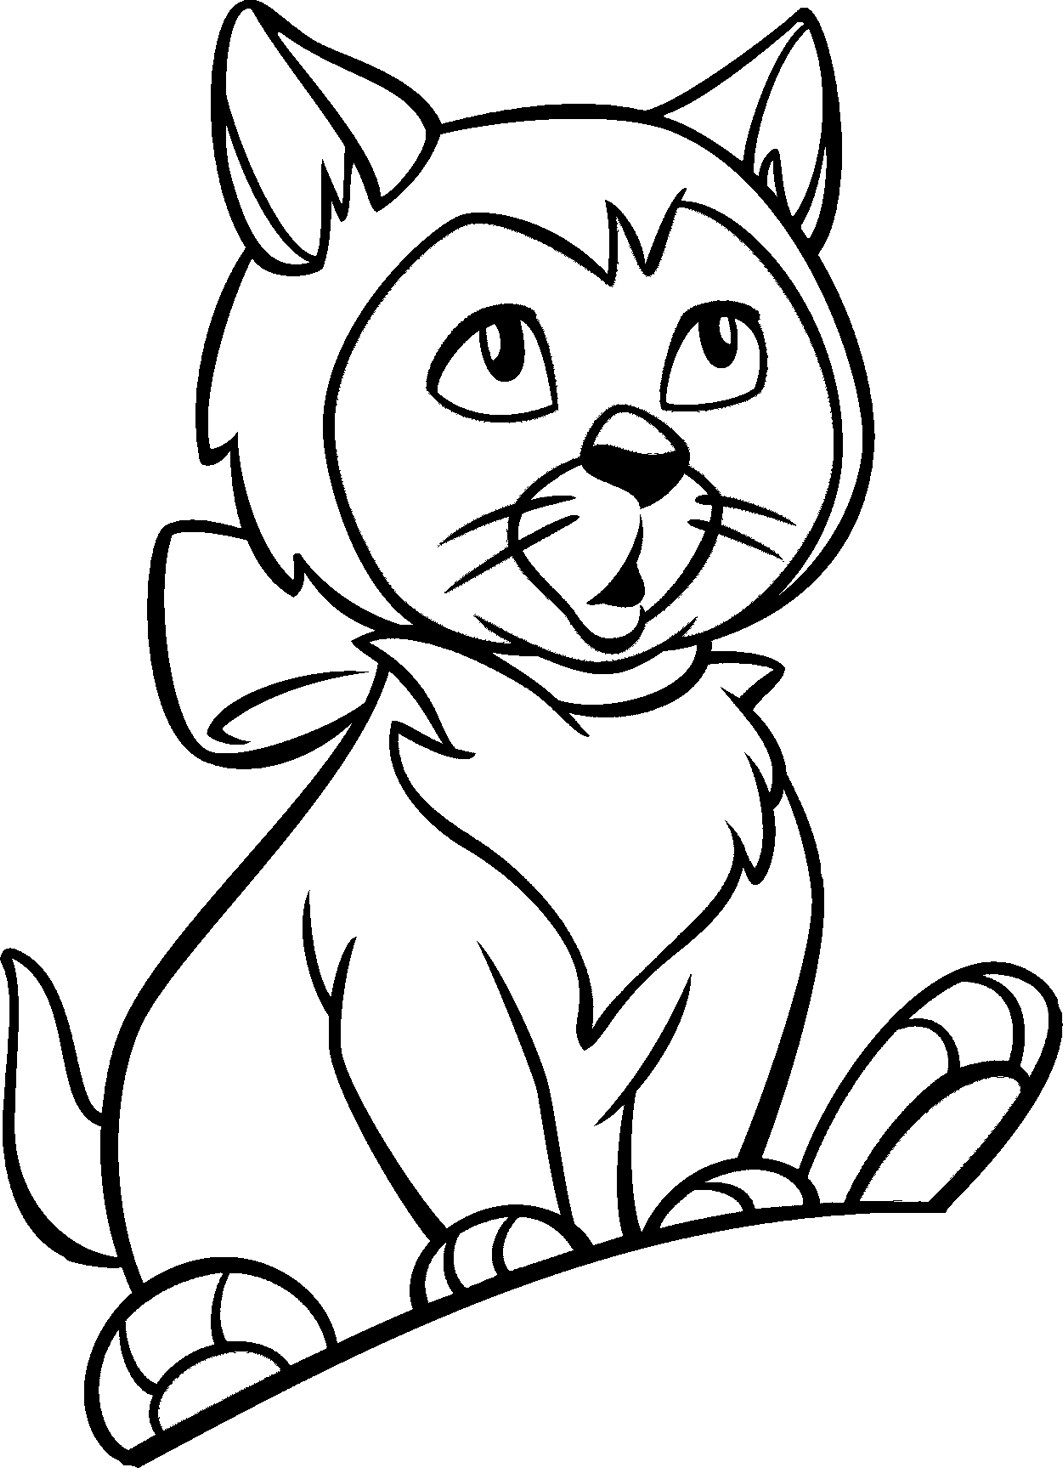 Kids Coloring Pages Cats
 Coloring Pages for Kids Cat Coloring Pages for Kids